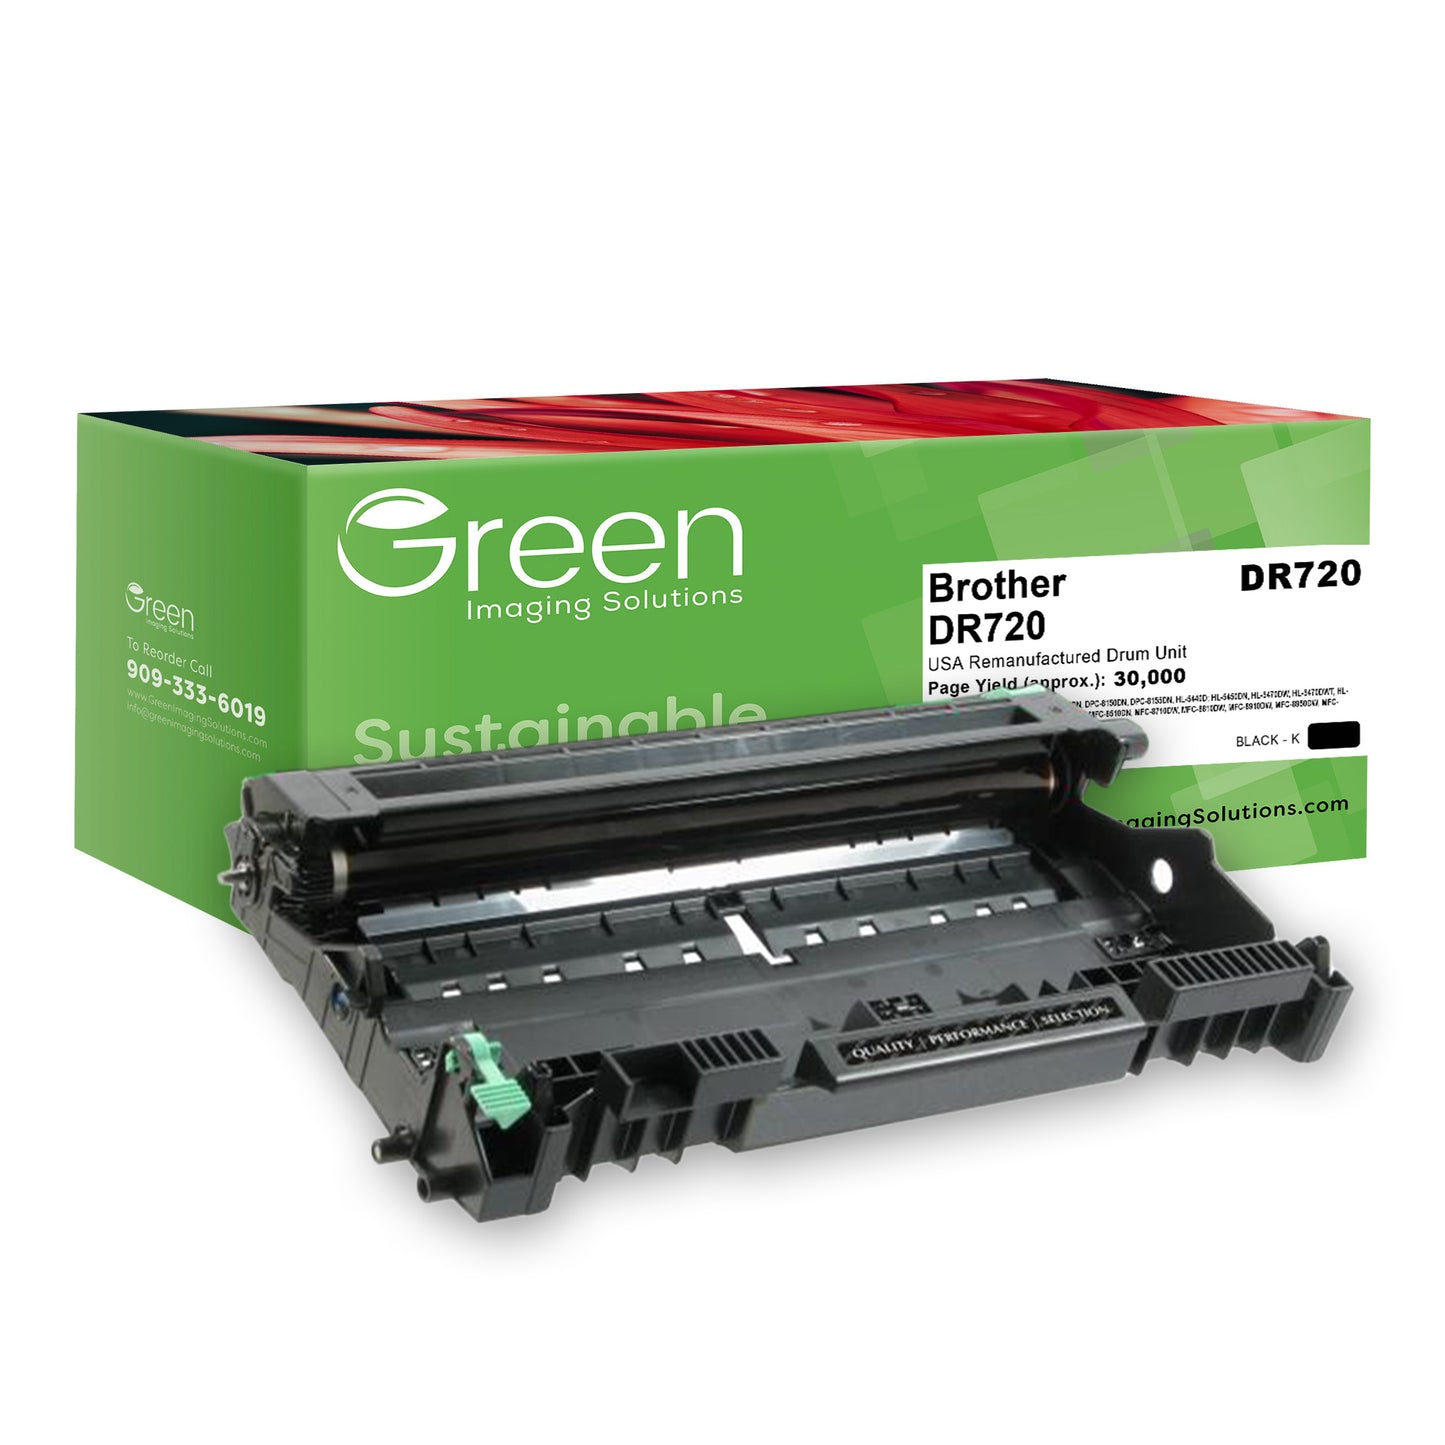 Green Imaging Solutions USA Remanufactured Drum Unit for Brother DR720